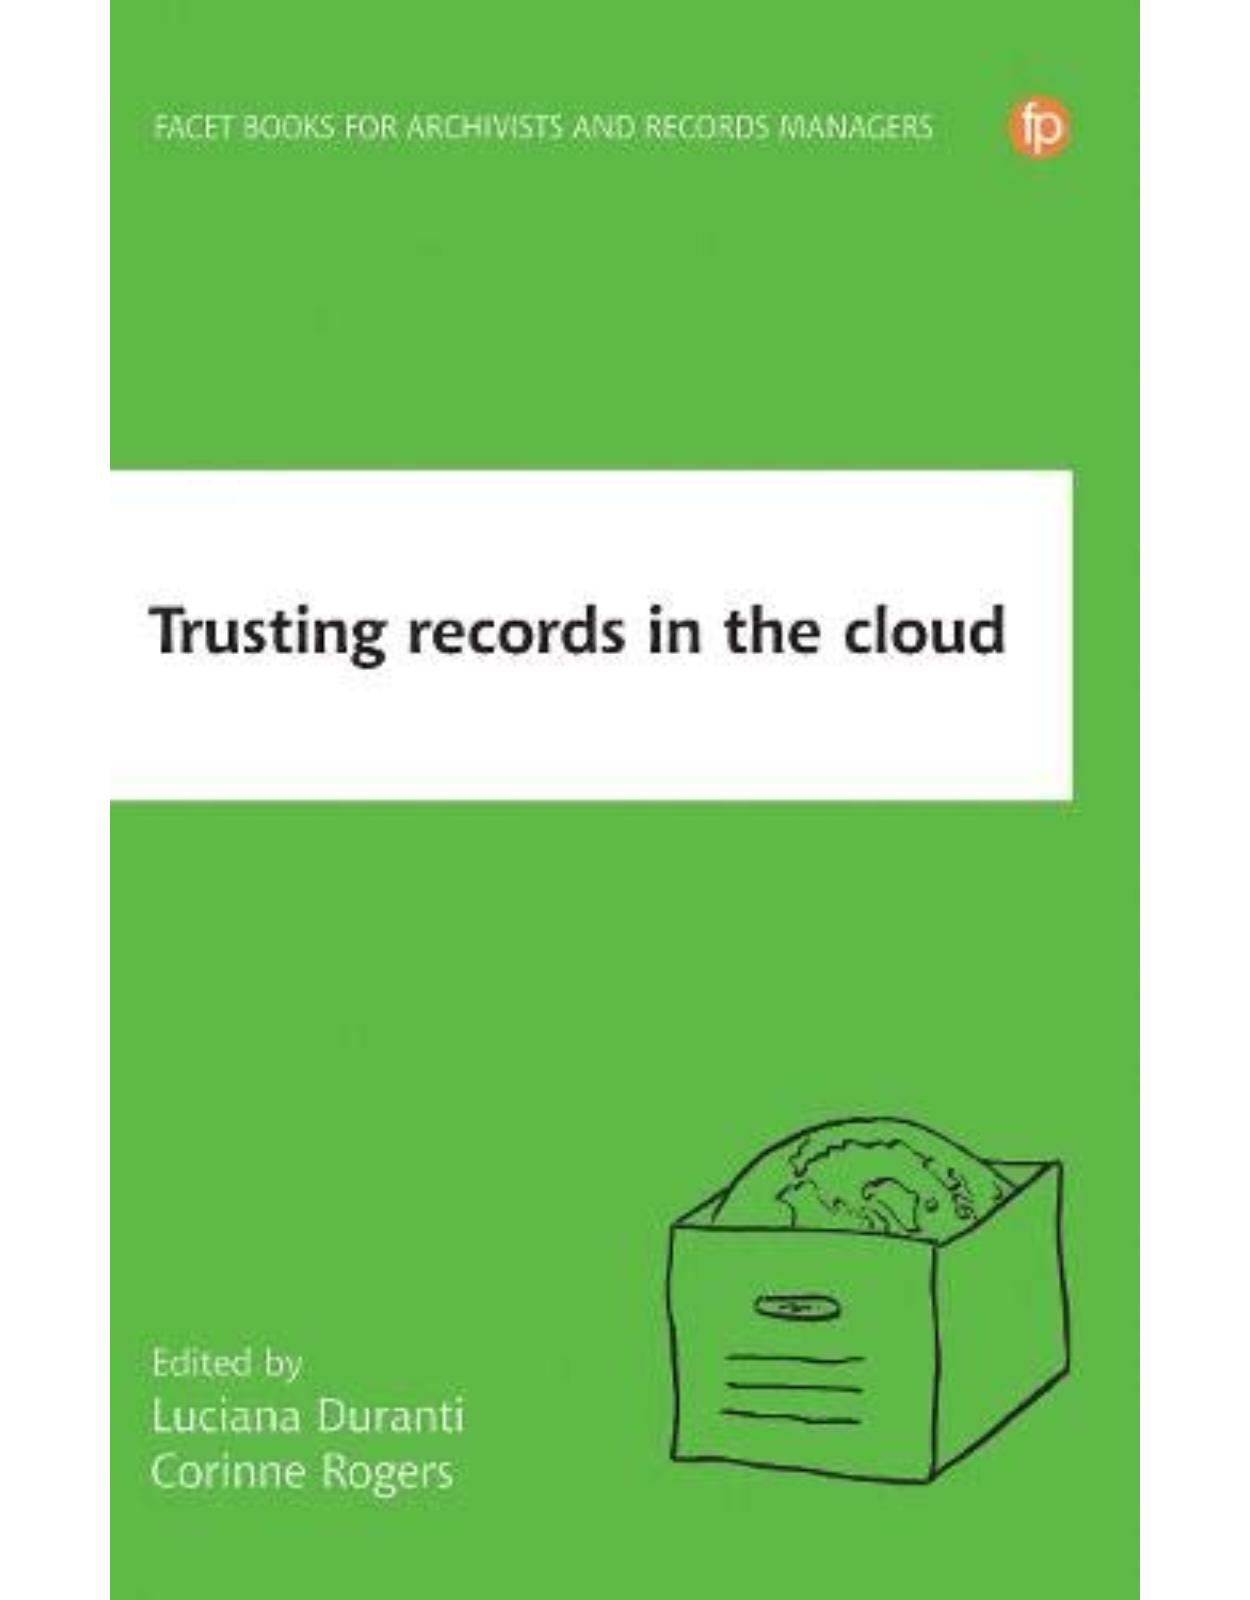 Trusting Records and Data in the Cloud: The creation, management, and preservation of trustworthy digital content 